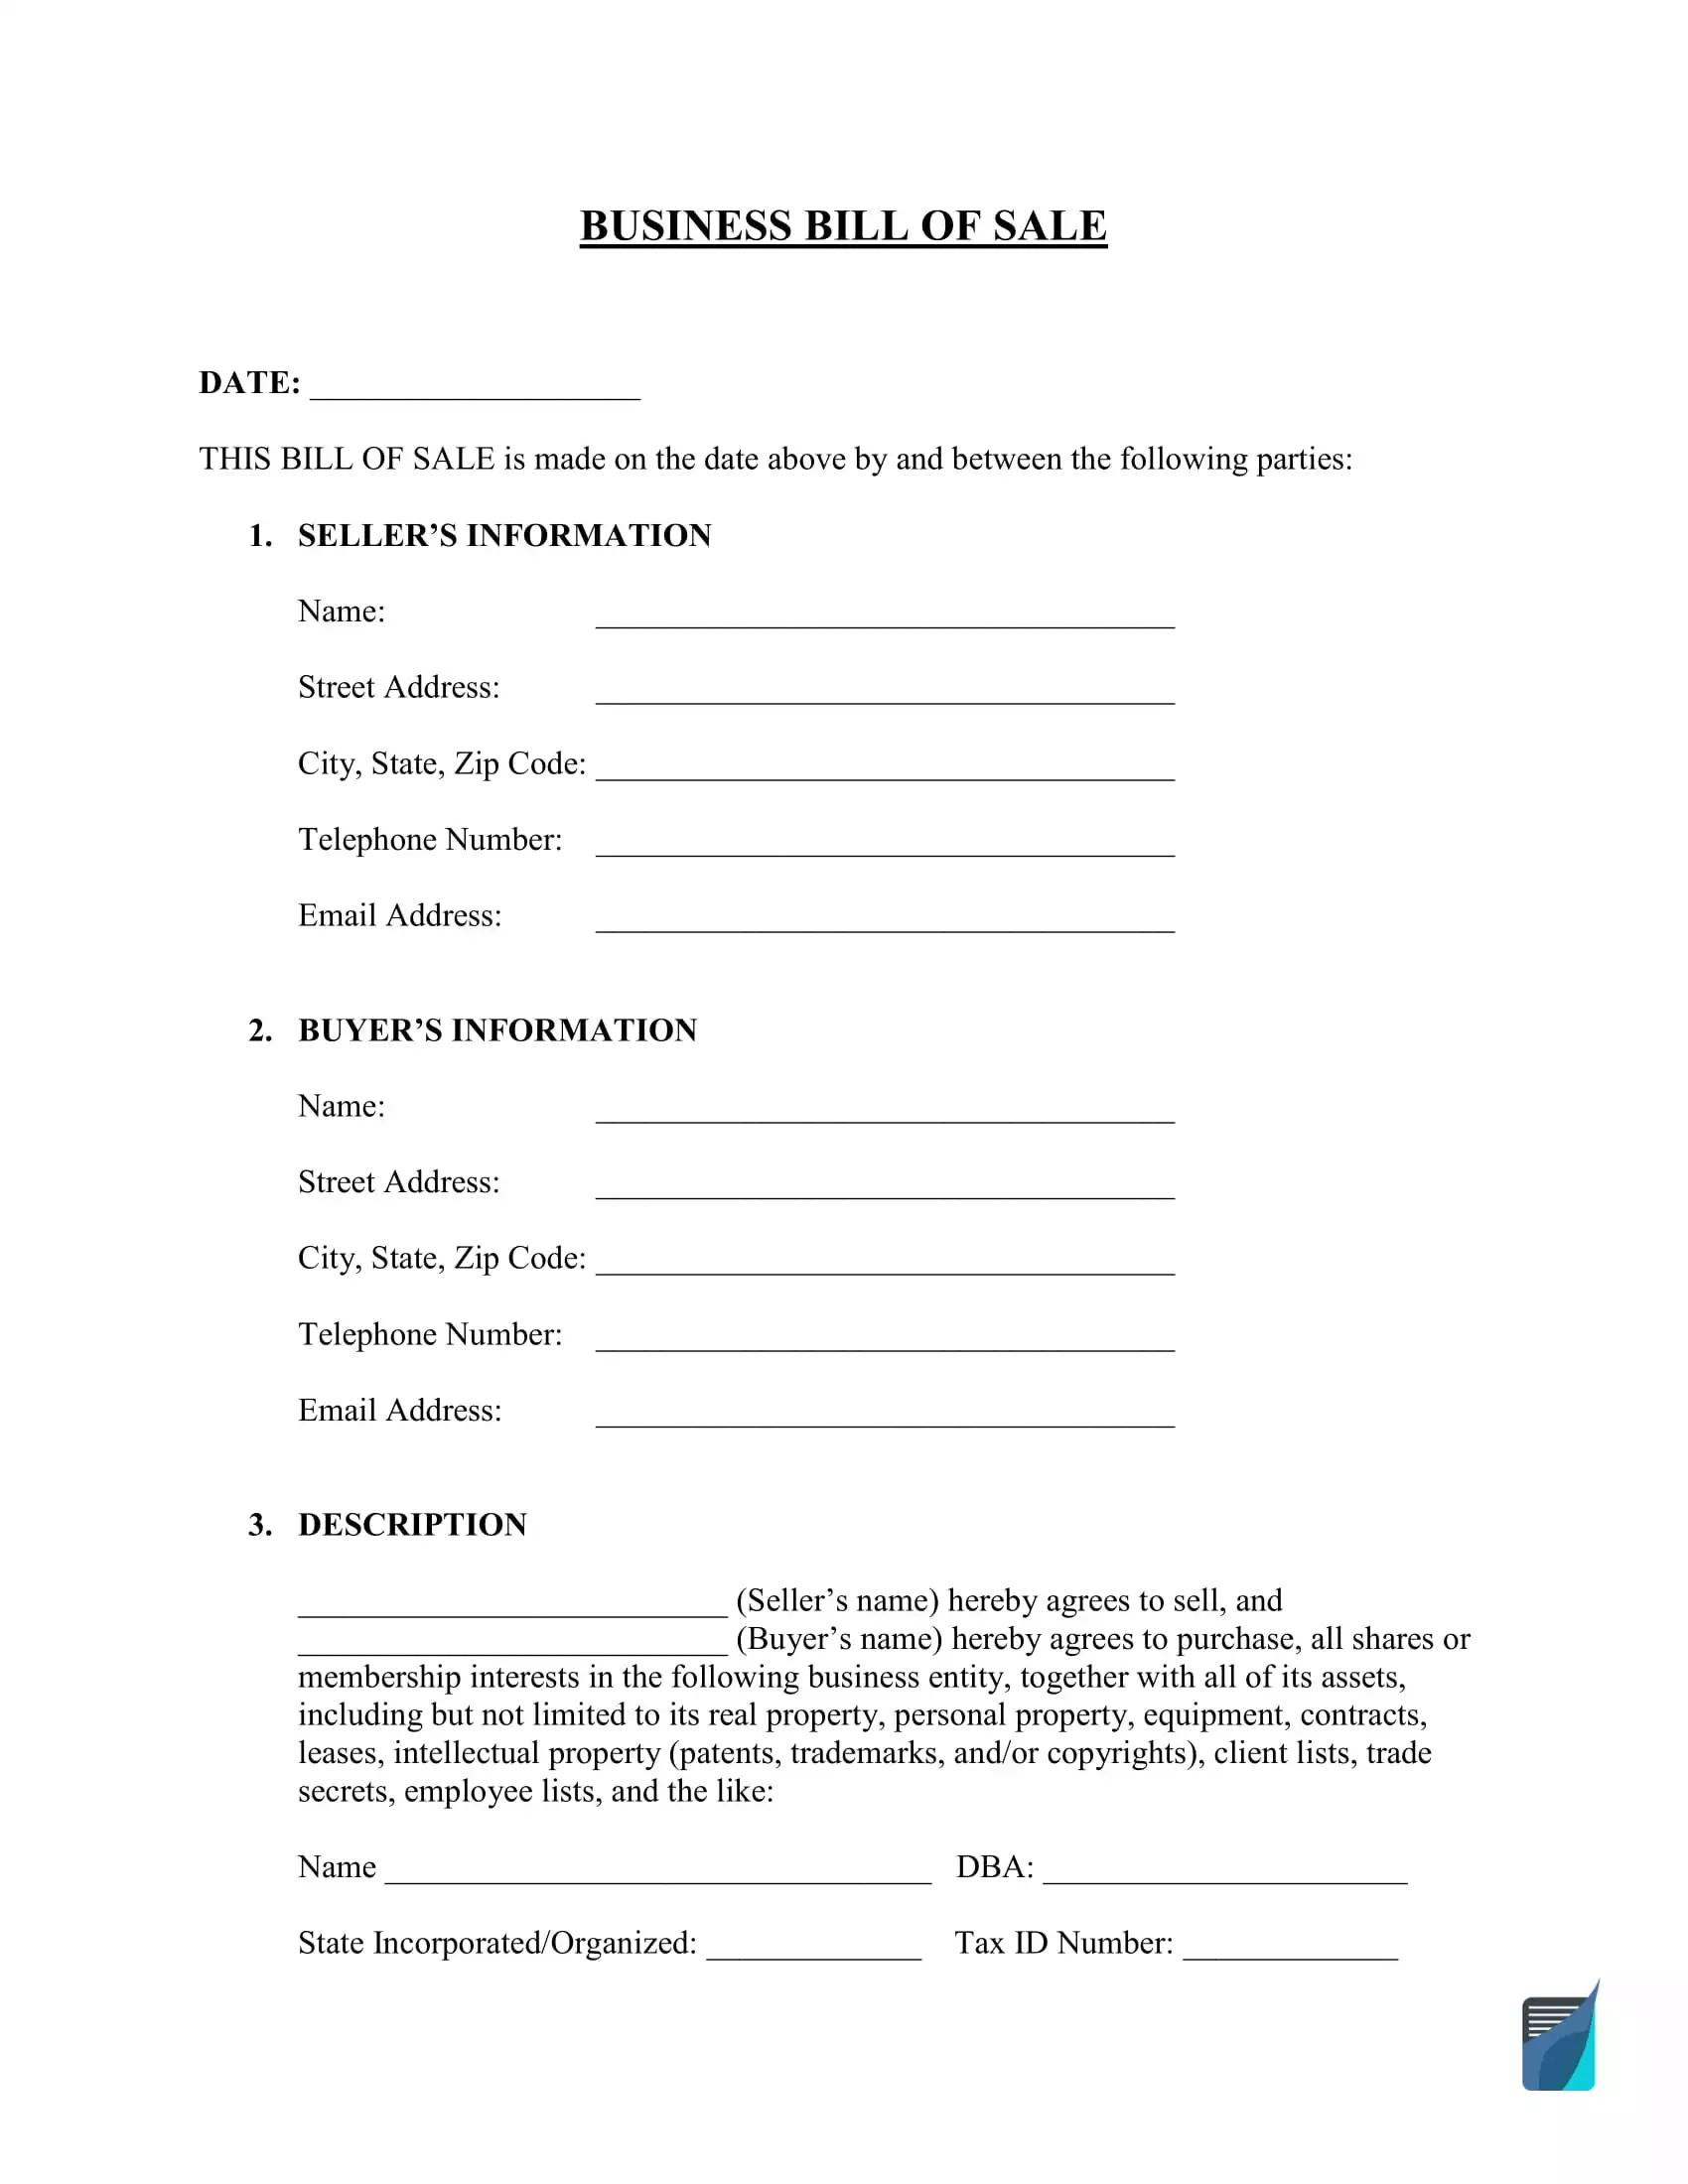 Business-bill-of-sale-template